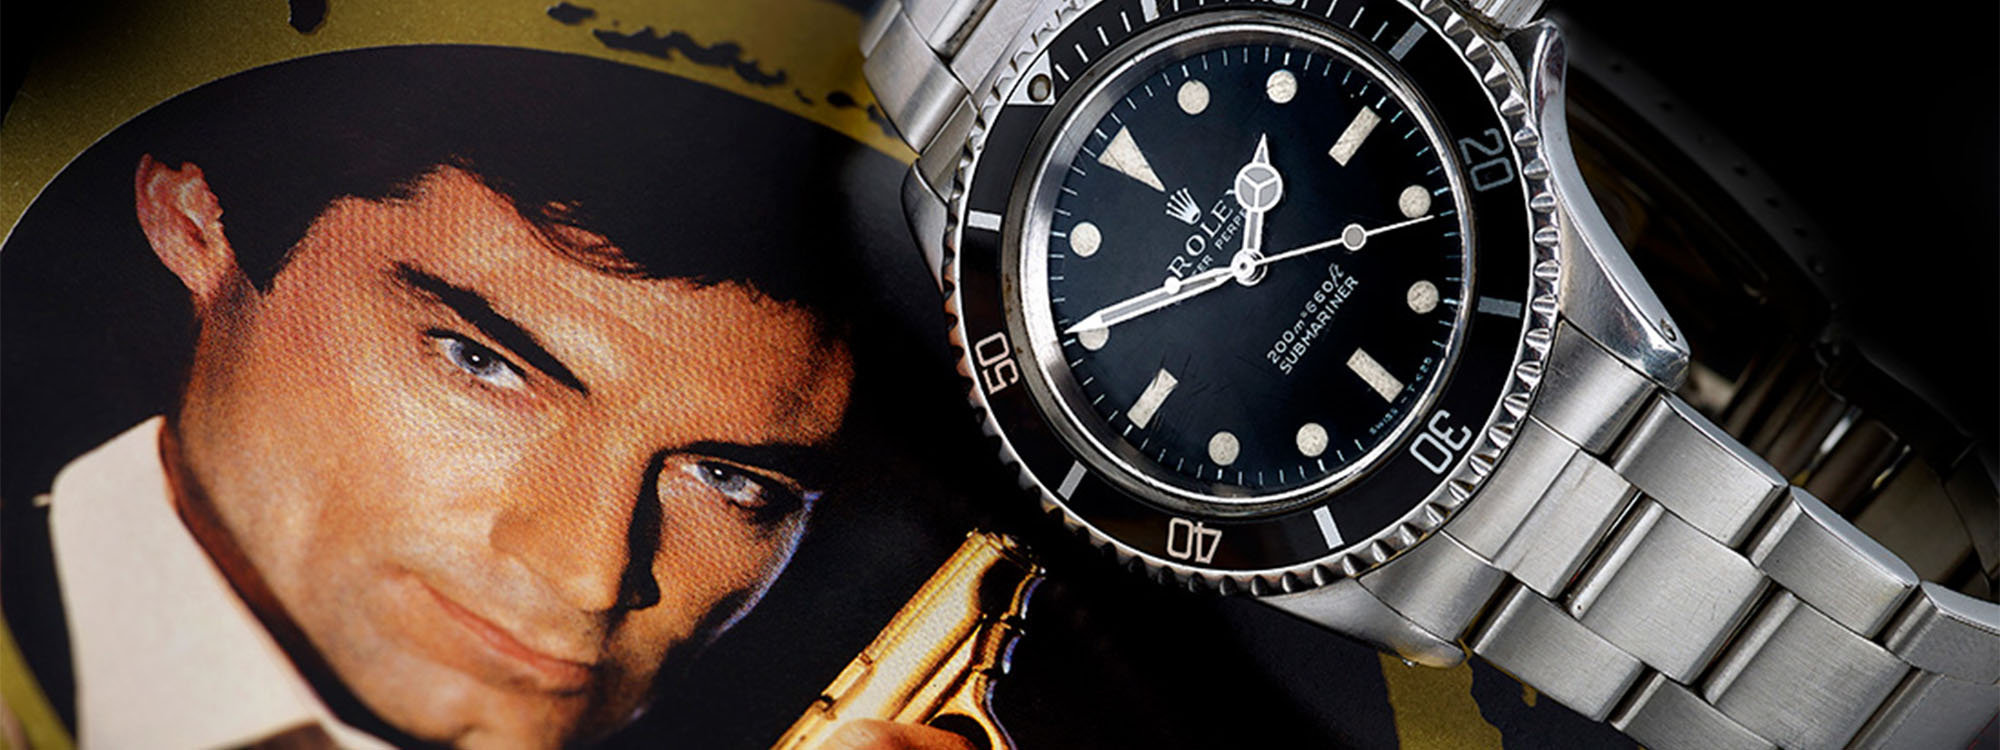 Bond Watches: The Comprehensive Guide to 50 Years of 007's Timep | Teddy Baldassarre